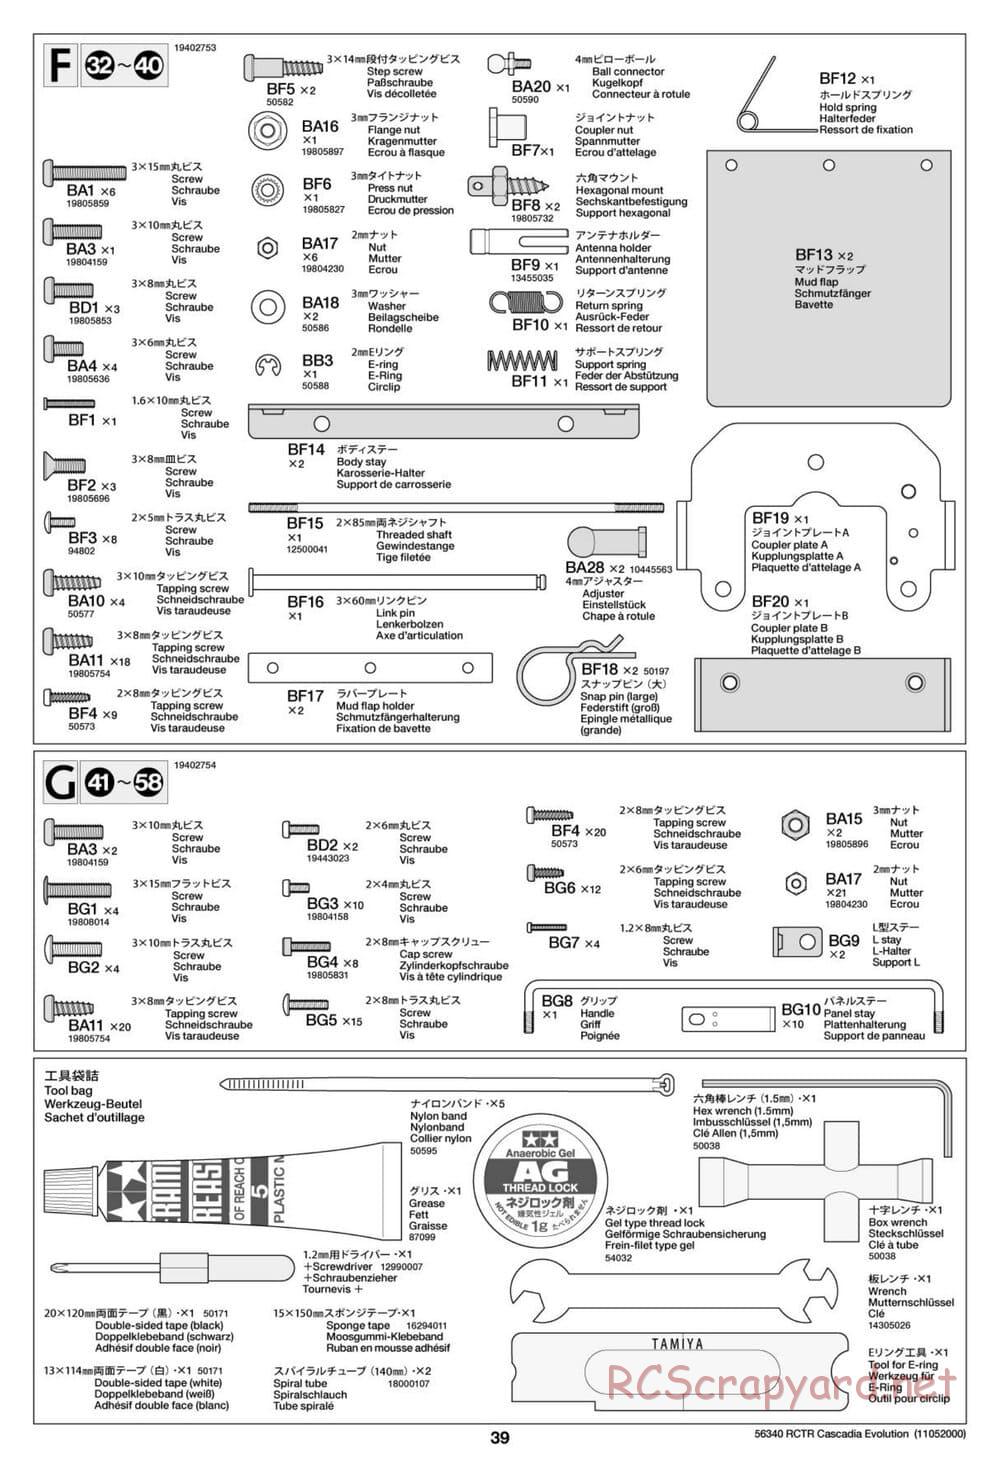 Tamiya - Freightliner Cascadia Evolution Tractor Truck Chassis - Manual - Page 39